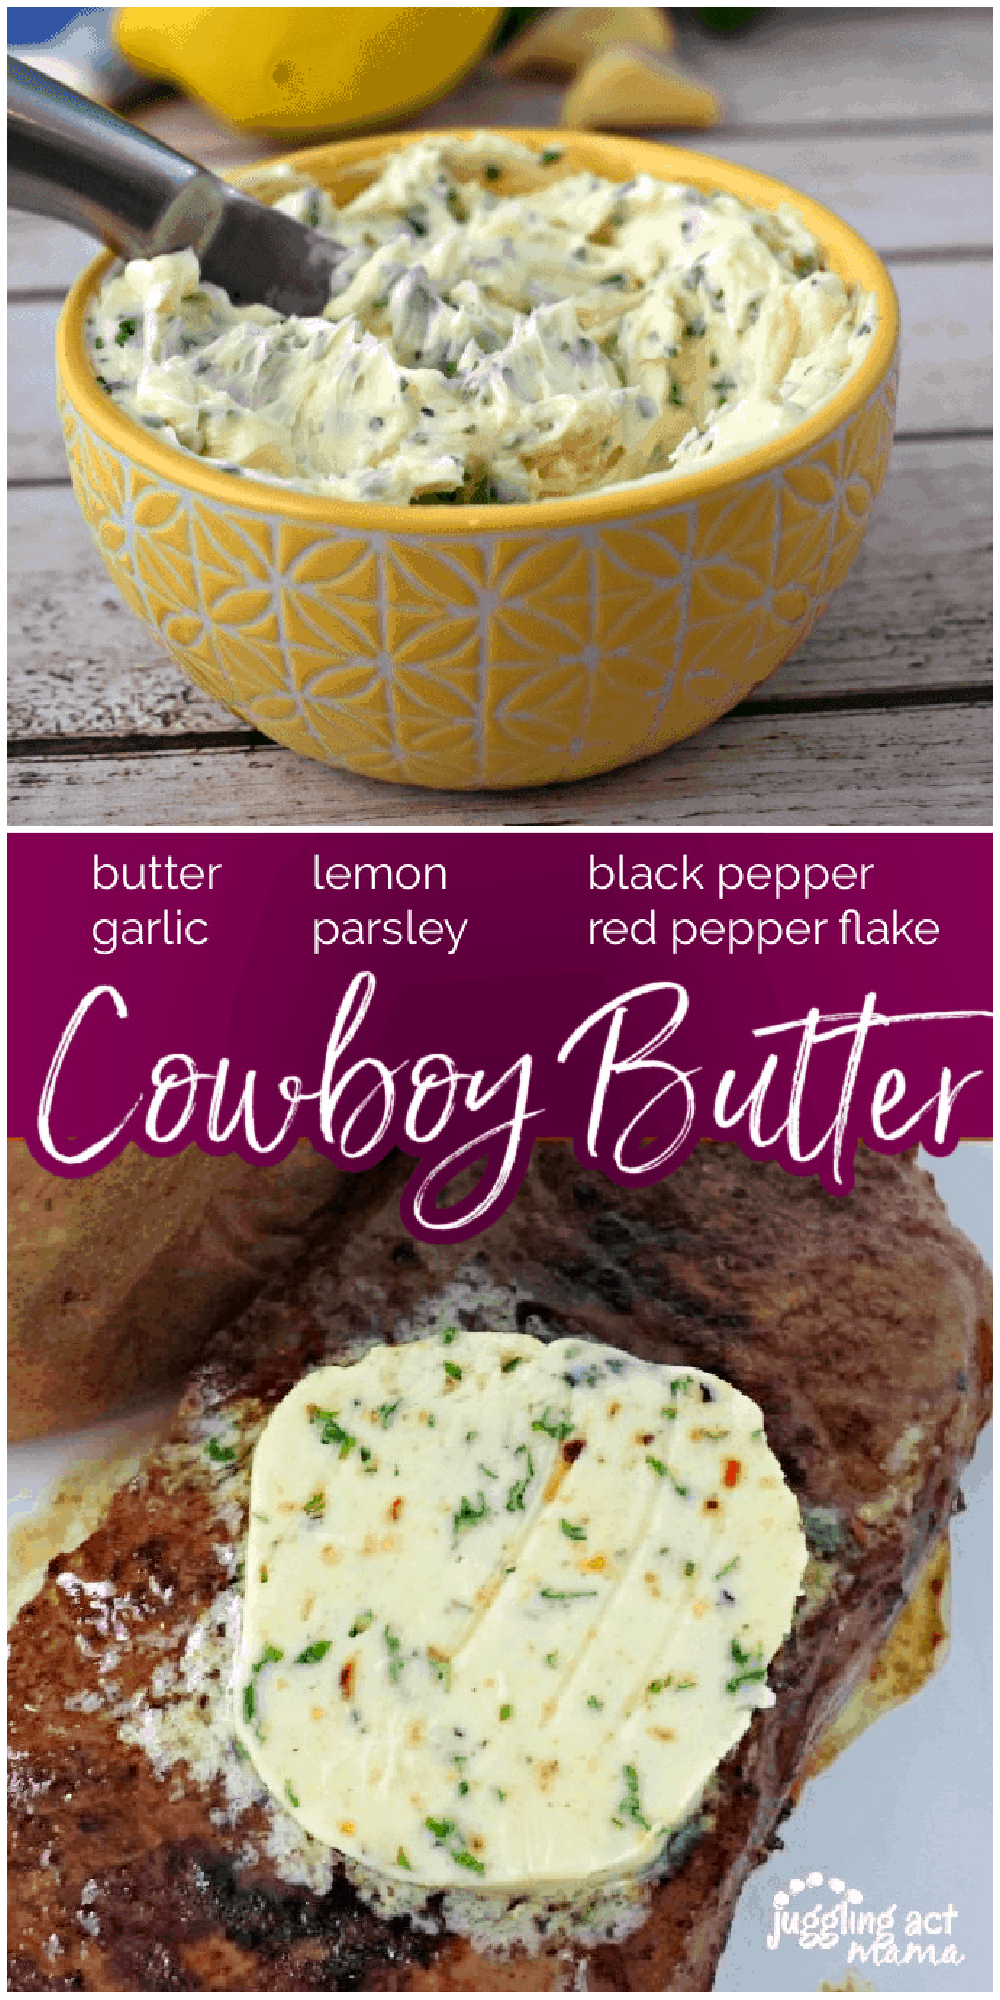 Make up a batch of compound butter worthy of grilling season in just minutes! This homemade Cowboy Butter is so delicious on grilled chicken, steak and lots more. You're going to love this Cowboy Butter recipe! via @jugglingactmama